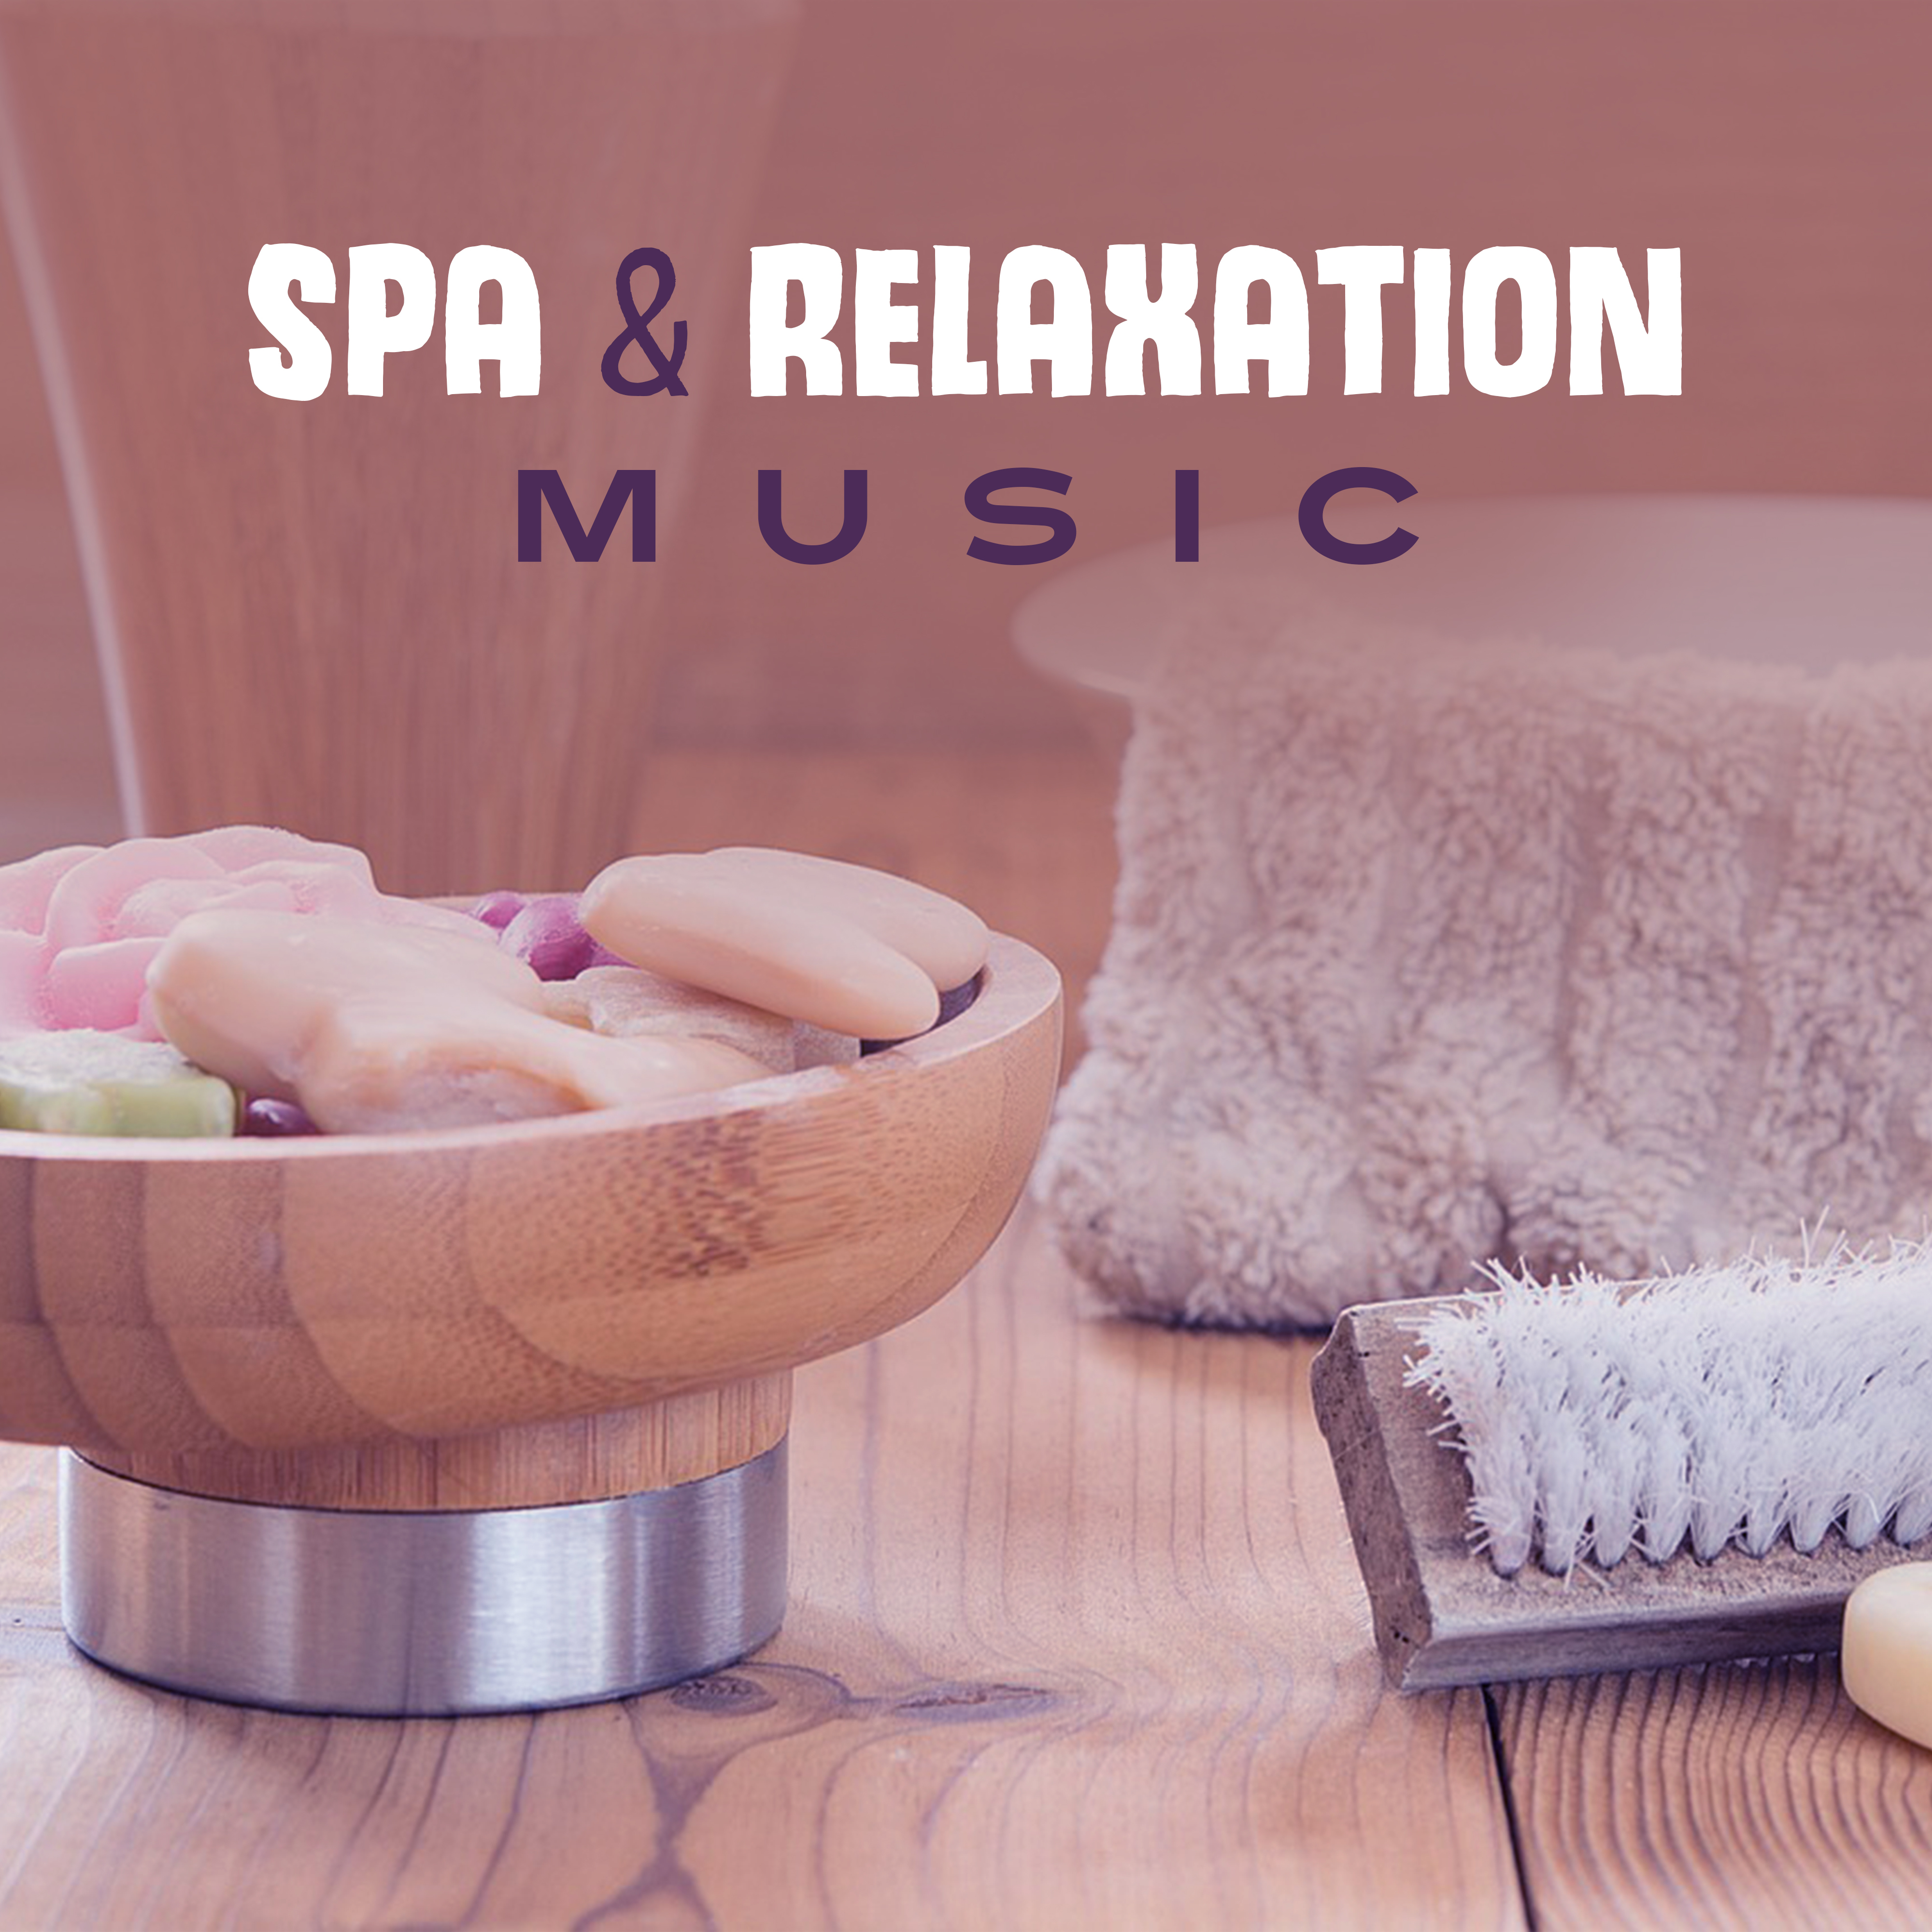 Spa & Relaxation Music – Music for Spa, Rest with Nature, New Age Calmness, Chill Yourself